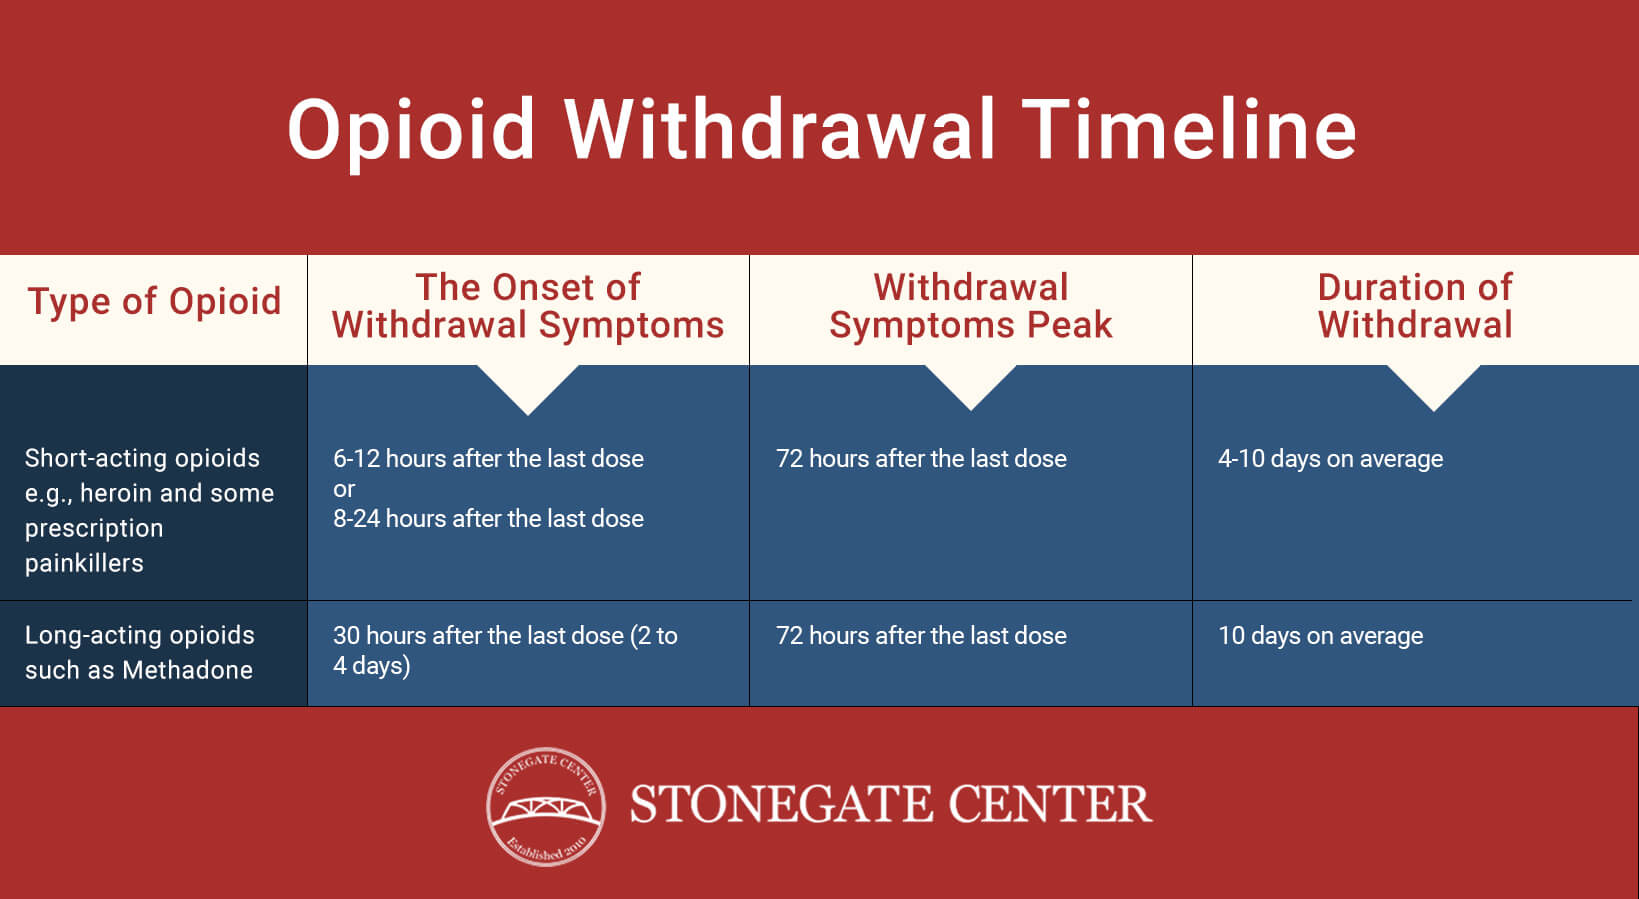 Stonegate Center Blog - Everything You Need to Know About Medical Detox - Opioid Withdrawal Timeline